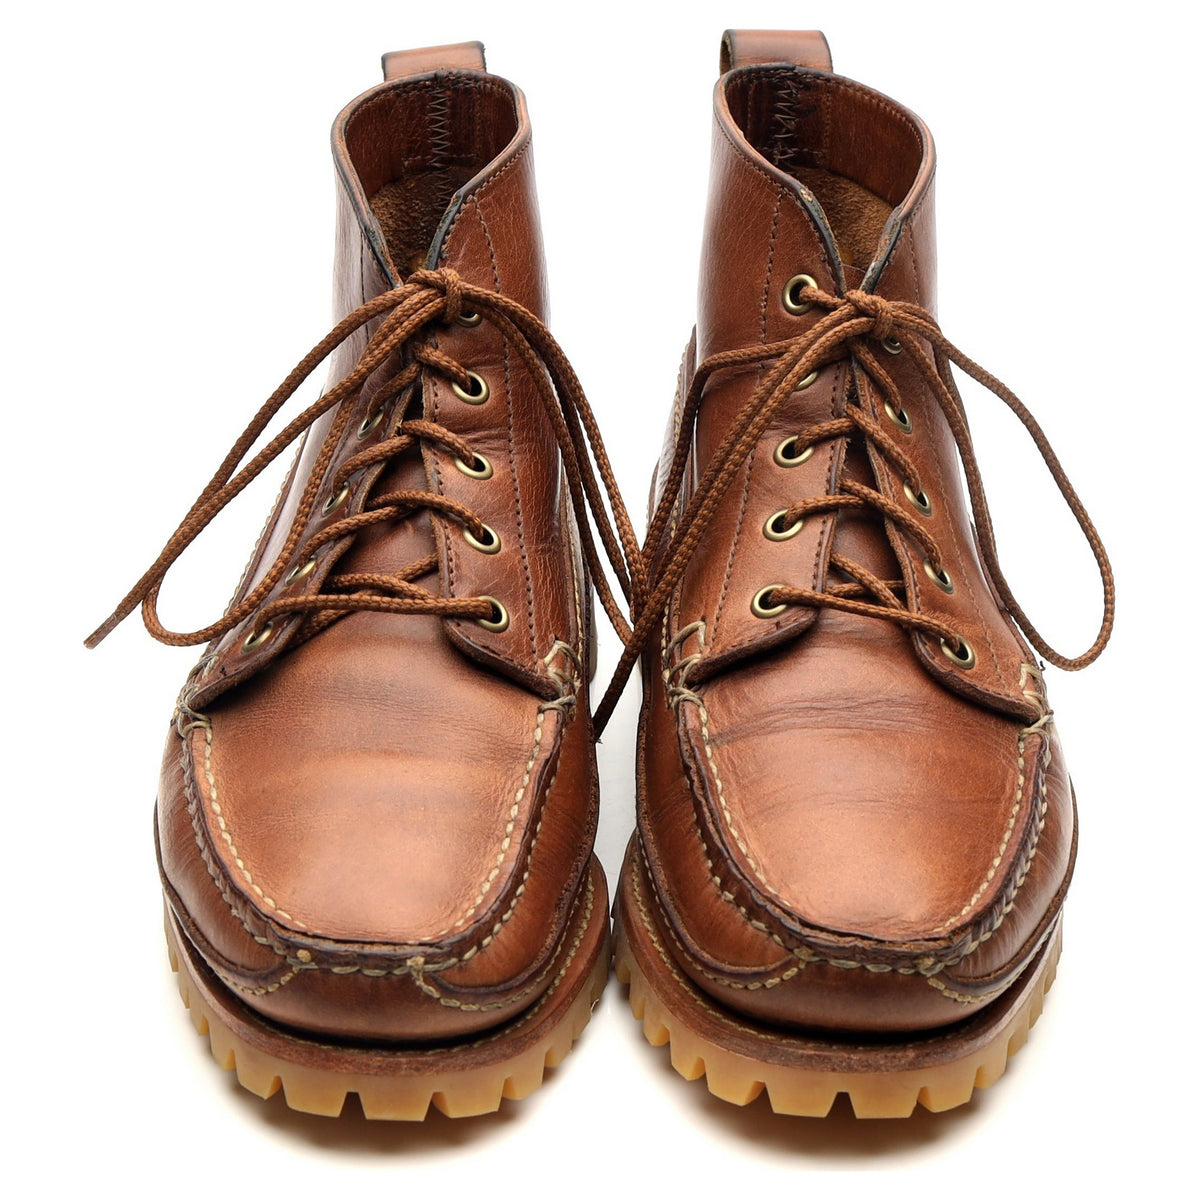 Brown Leather Camp Boots UK 9 US 9.5 D